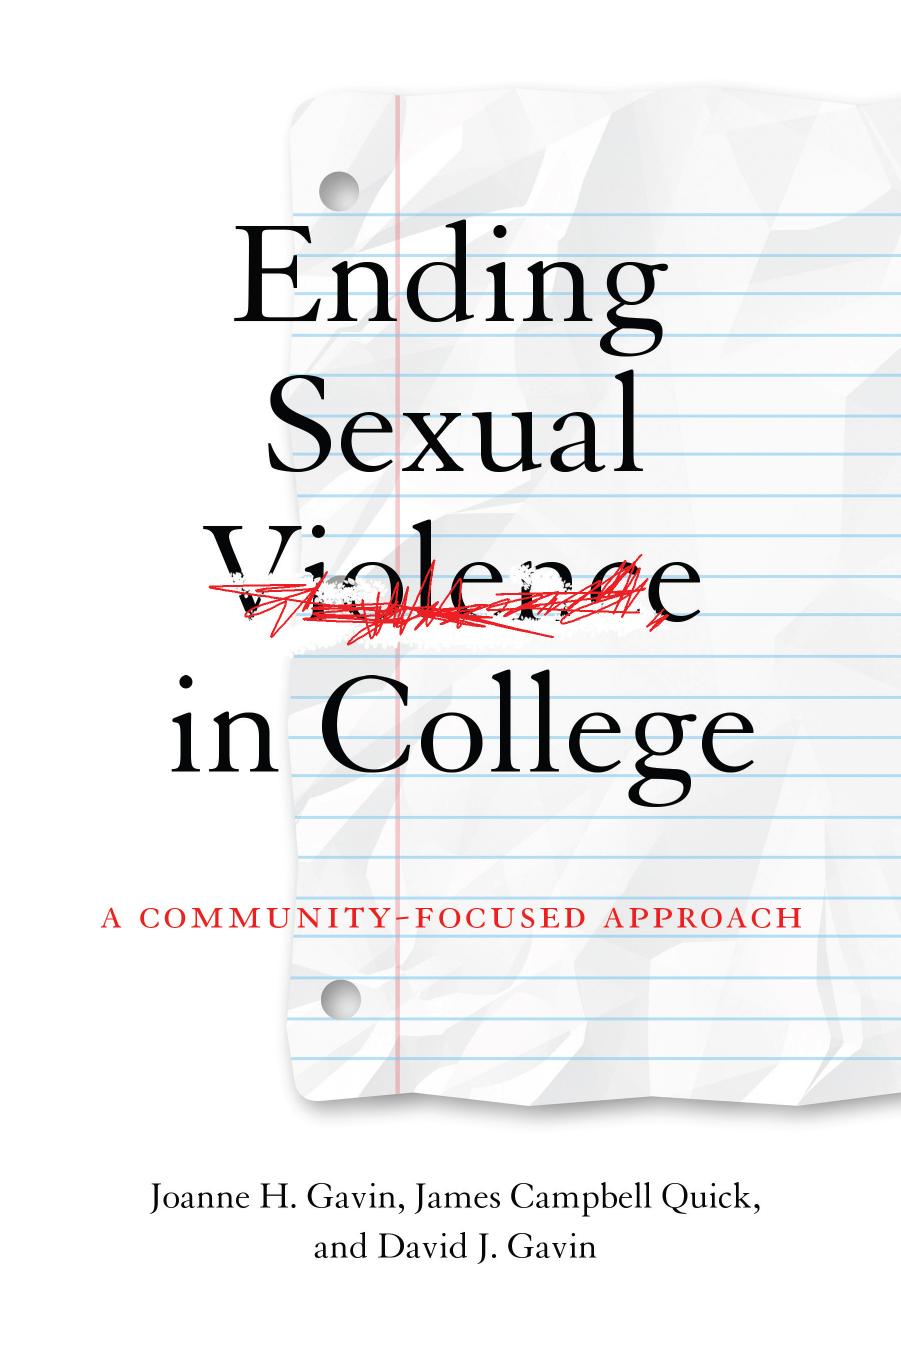 Ending Sexual Violence in College : A Community-Focused Approach by Joanne H. Gavin; James Campbell Quick; David J. Gavin